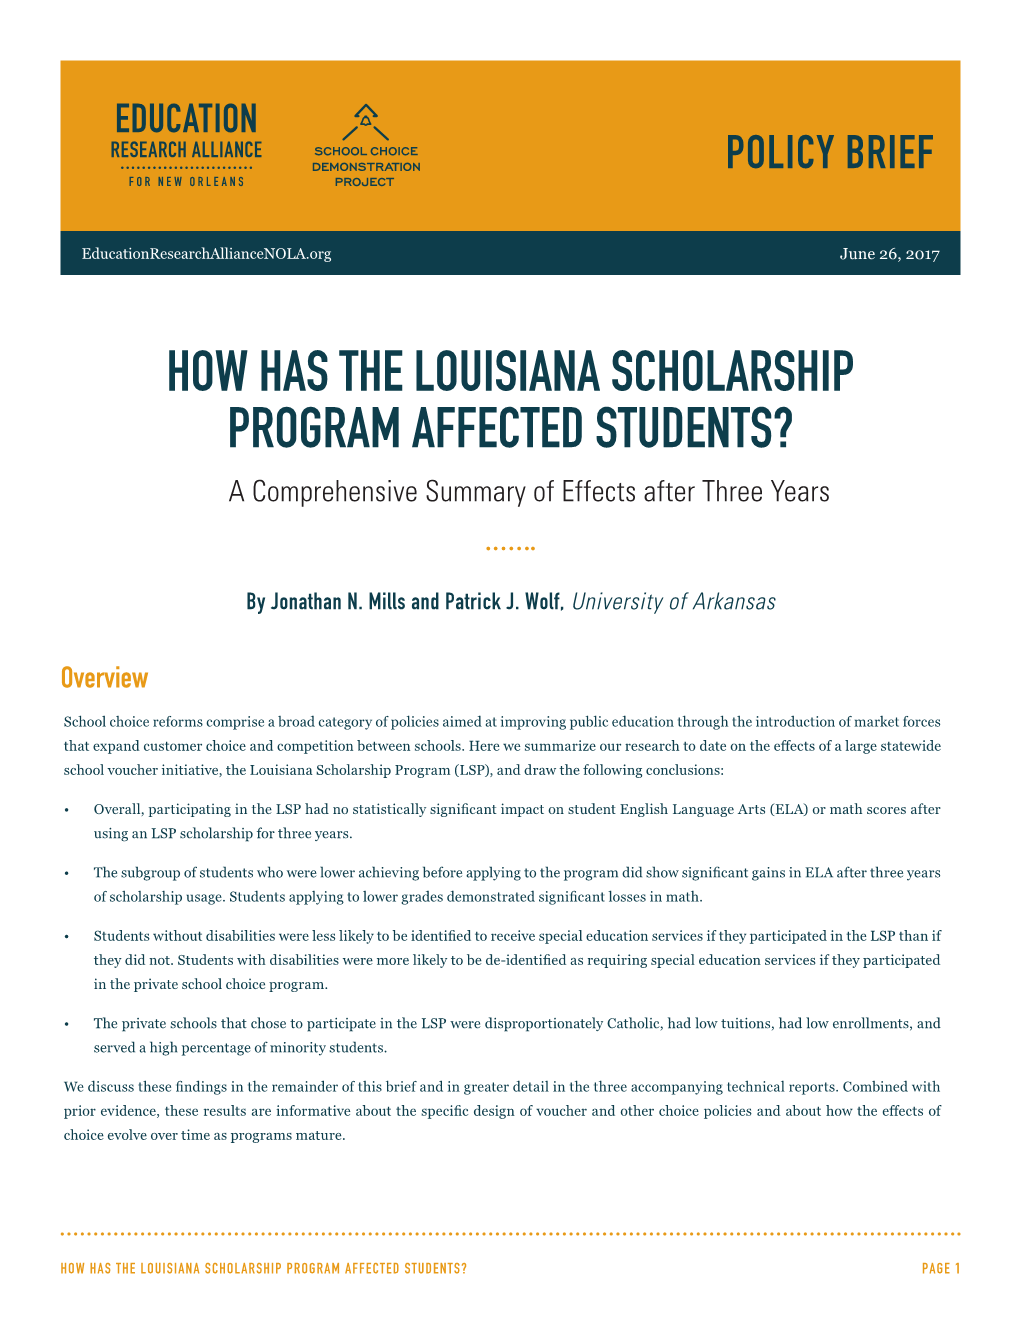 HOW HAS the LOUISIANA SCHOLARSHIP PROGRAM AFFECTED STUDENTS? a Comprehensive Summary of Effects After Three Years